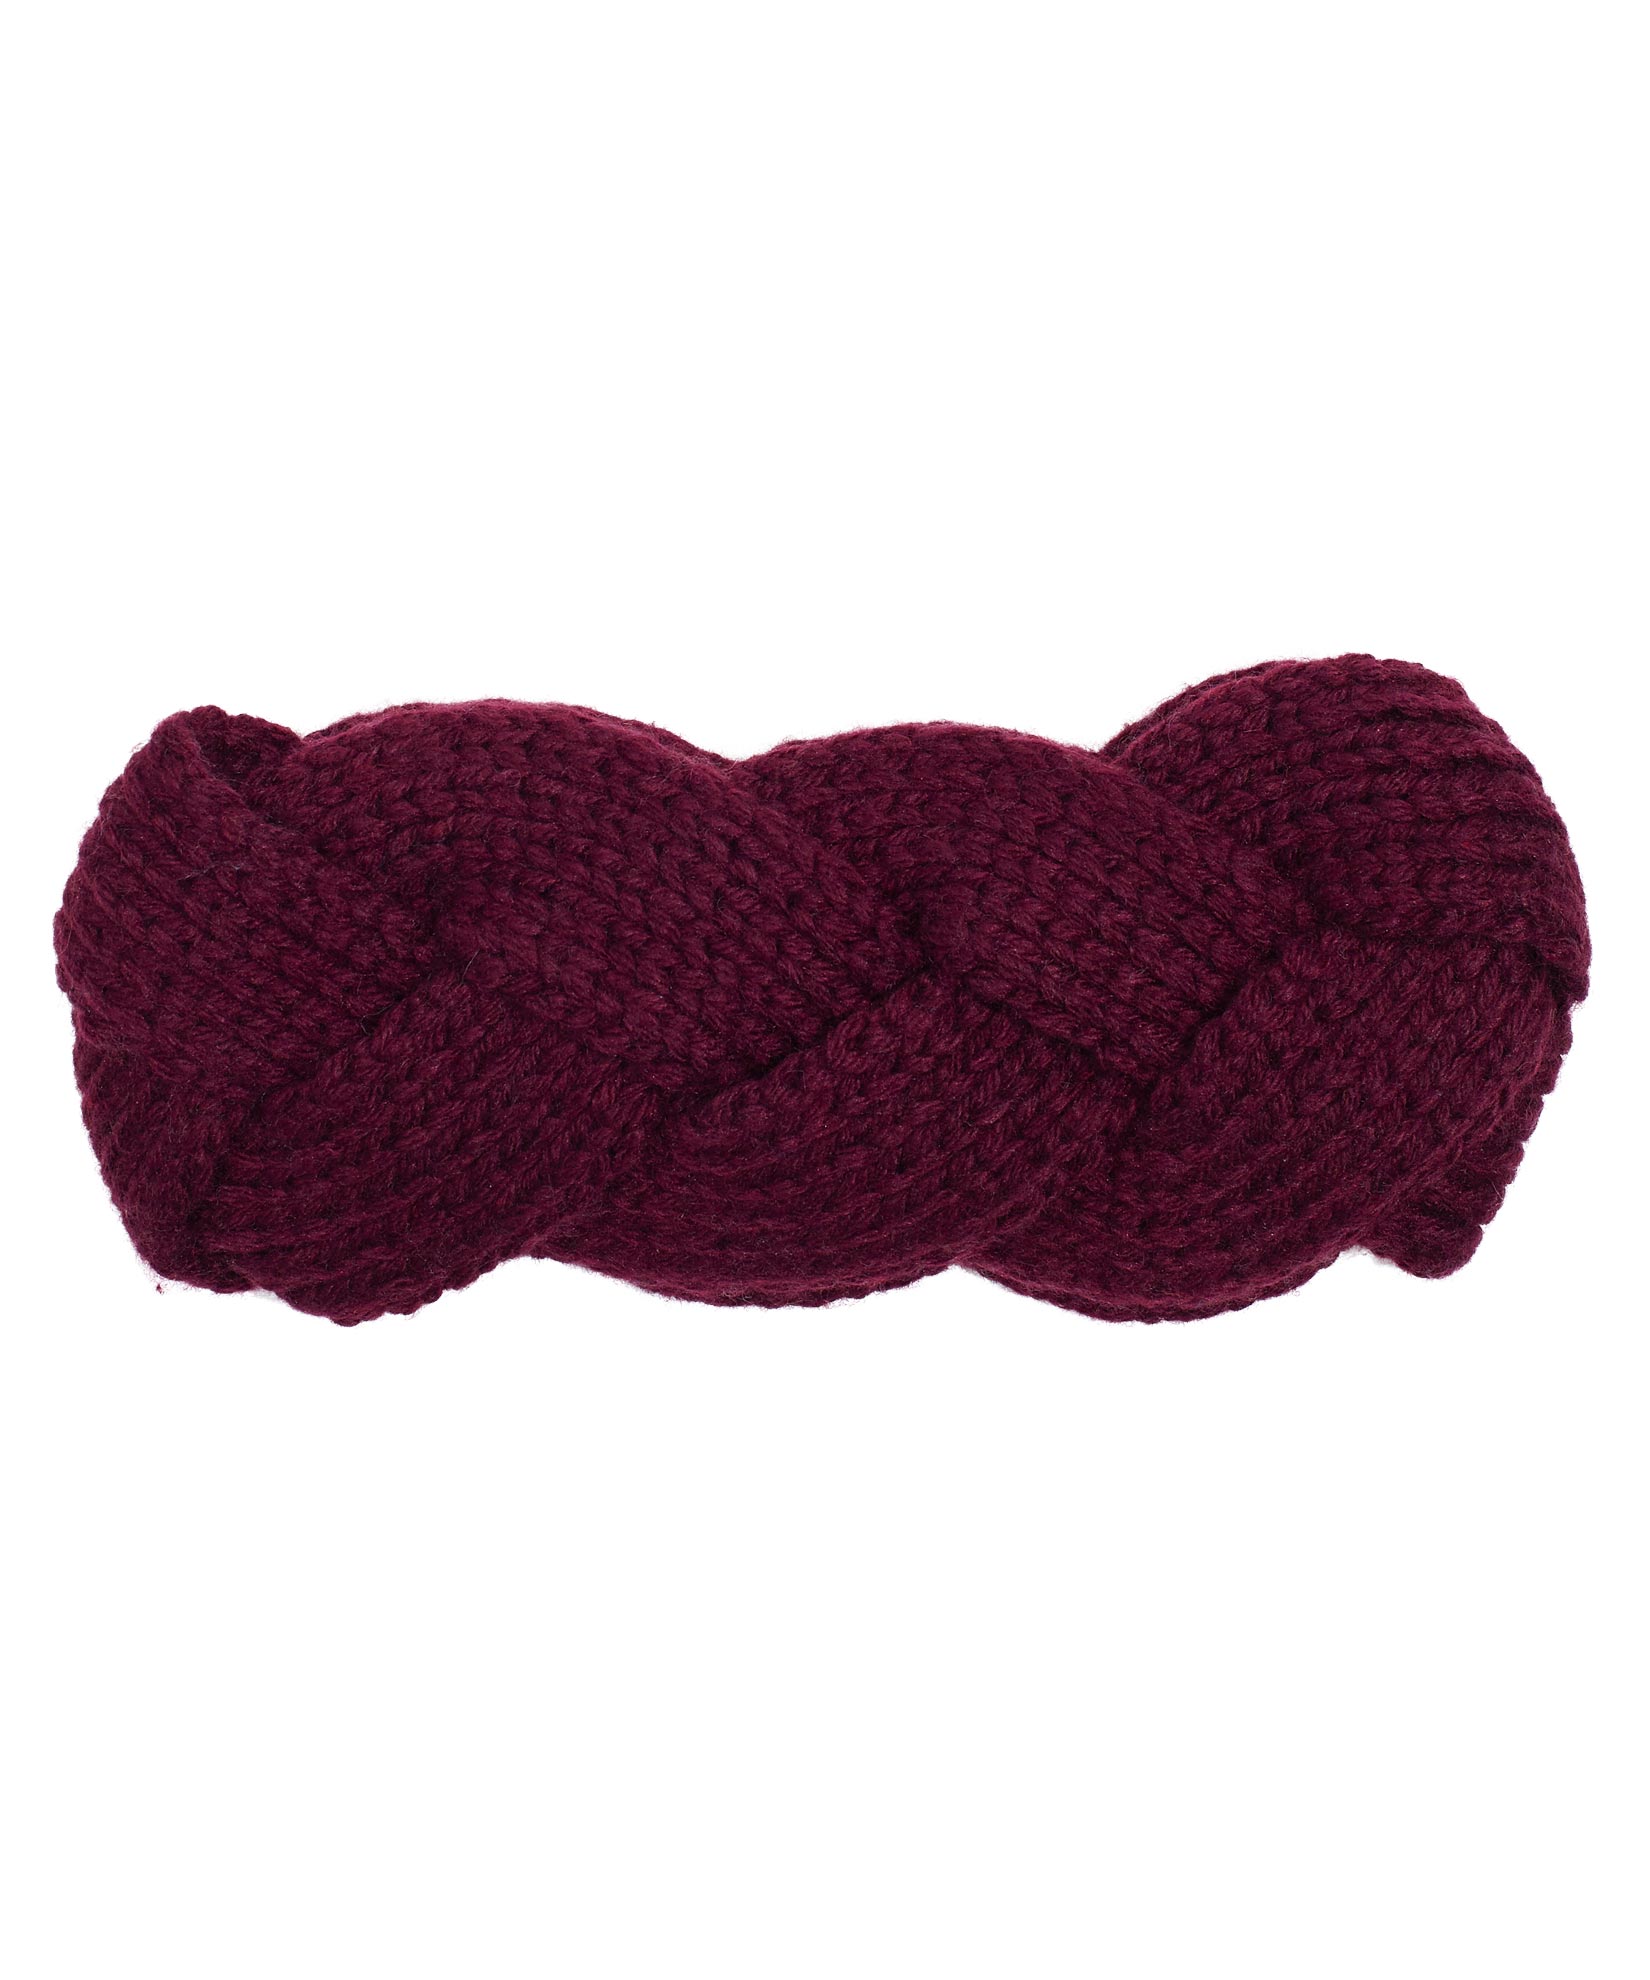 Recycled Cable Headband in color Garnet